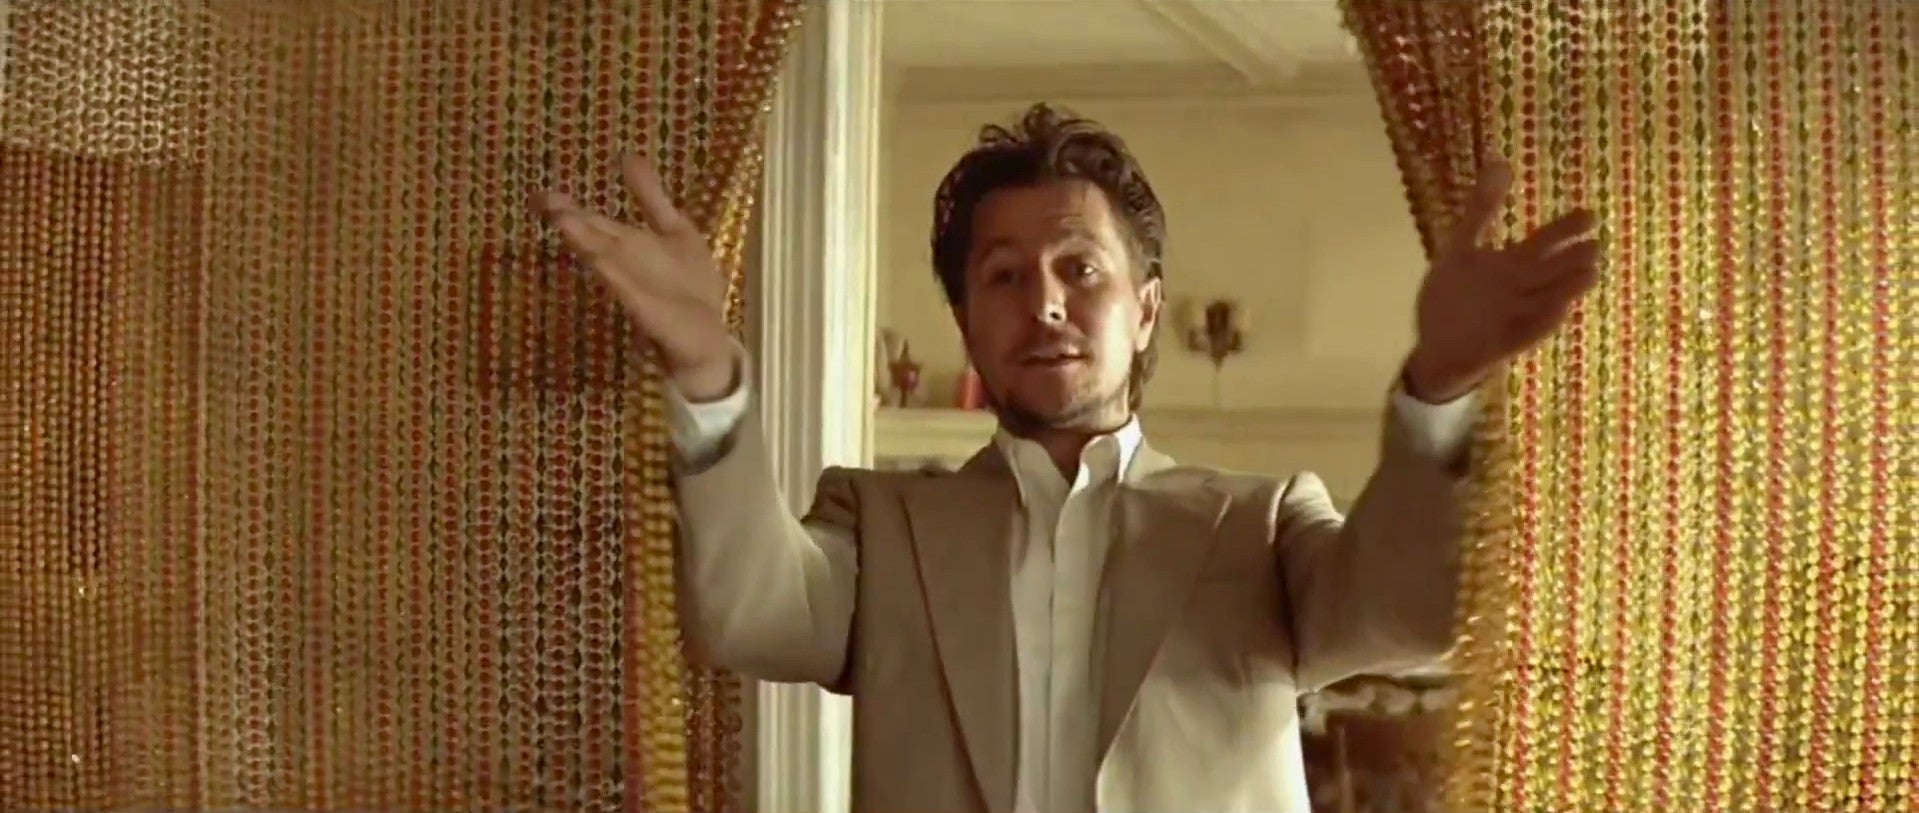 https://static.independent.co.uk/s3fs-public/thumbnails/image/2016/03/01/11/gary-oldman-as-stansfield-in-the-professional.jpg